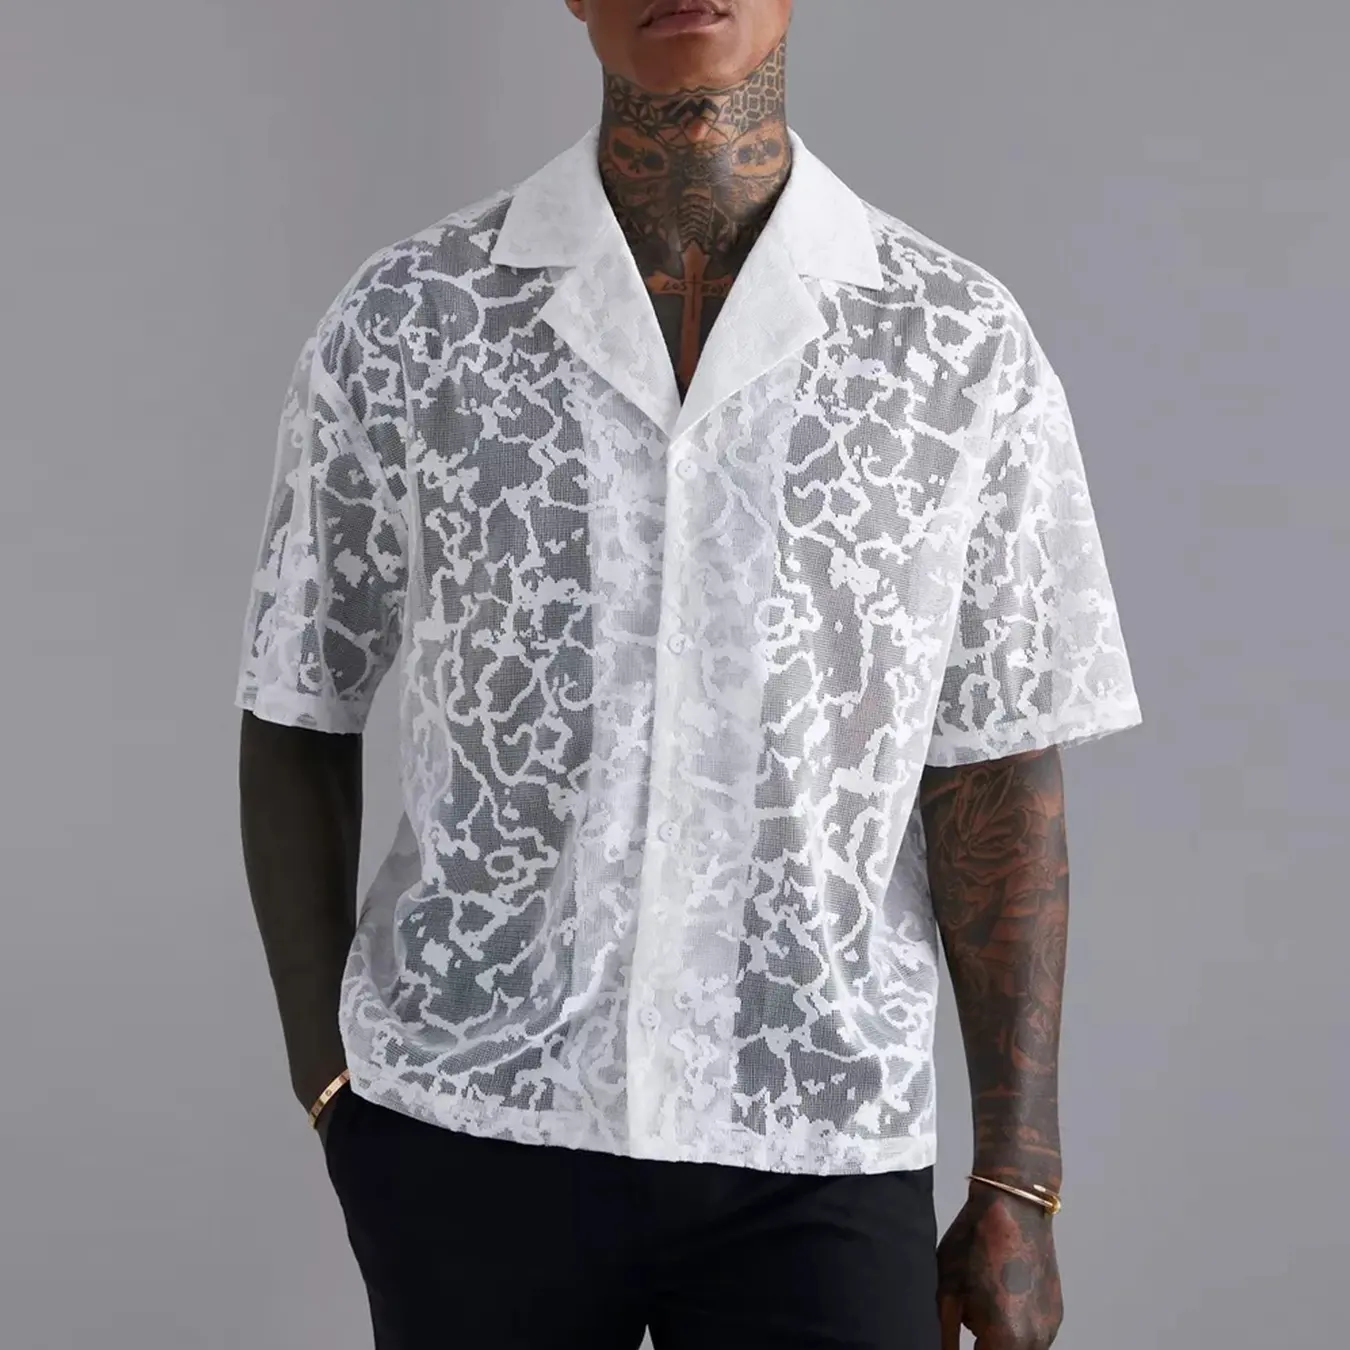 Mens Wholesale OEM Summer essentials Texture Button Up Sheer Floral Lace white cotton shirt Custom short sleeve shirts for men